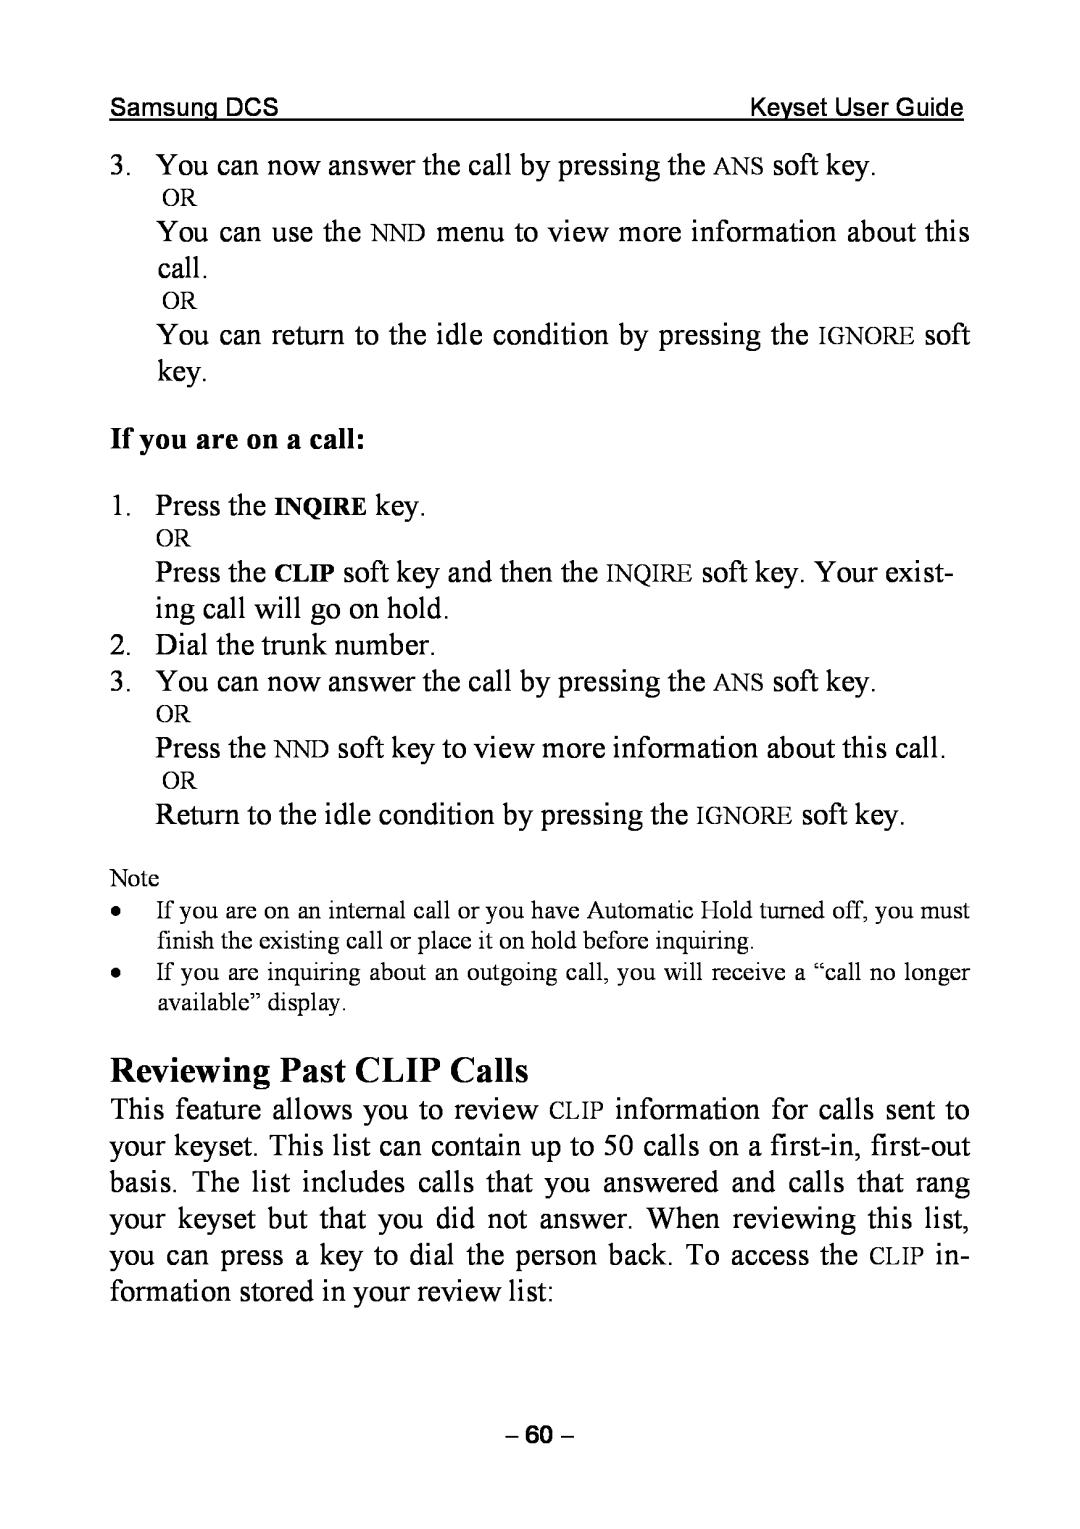 Samsung DCS KEYSET manual Reviewing Past CLIP Calls, If you are on a call 